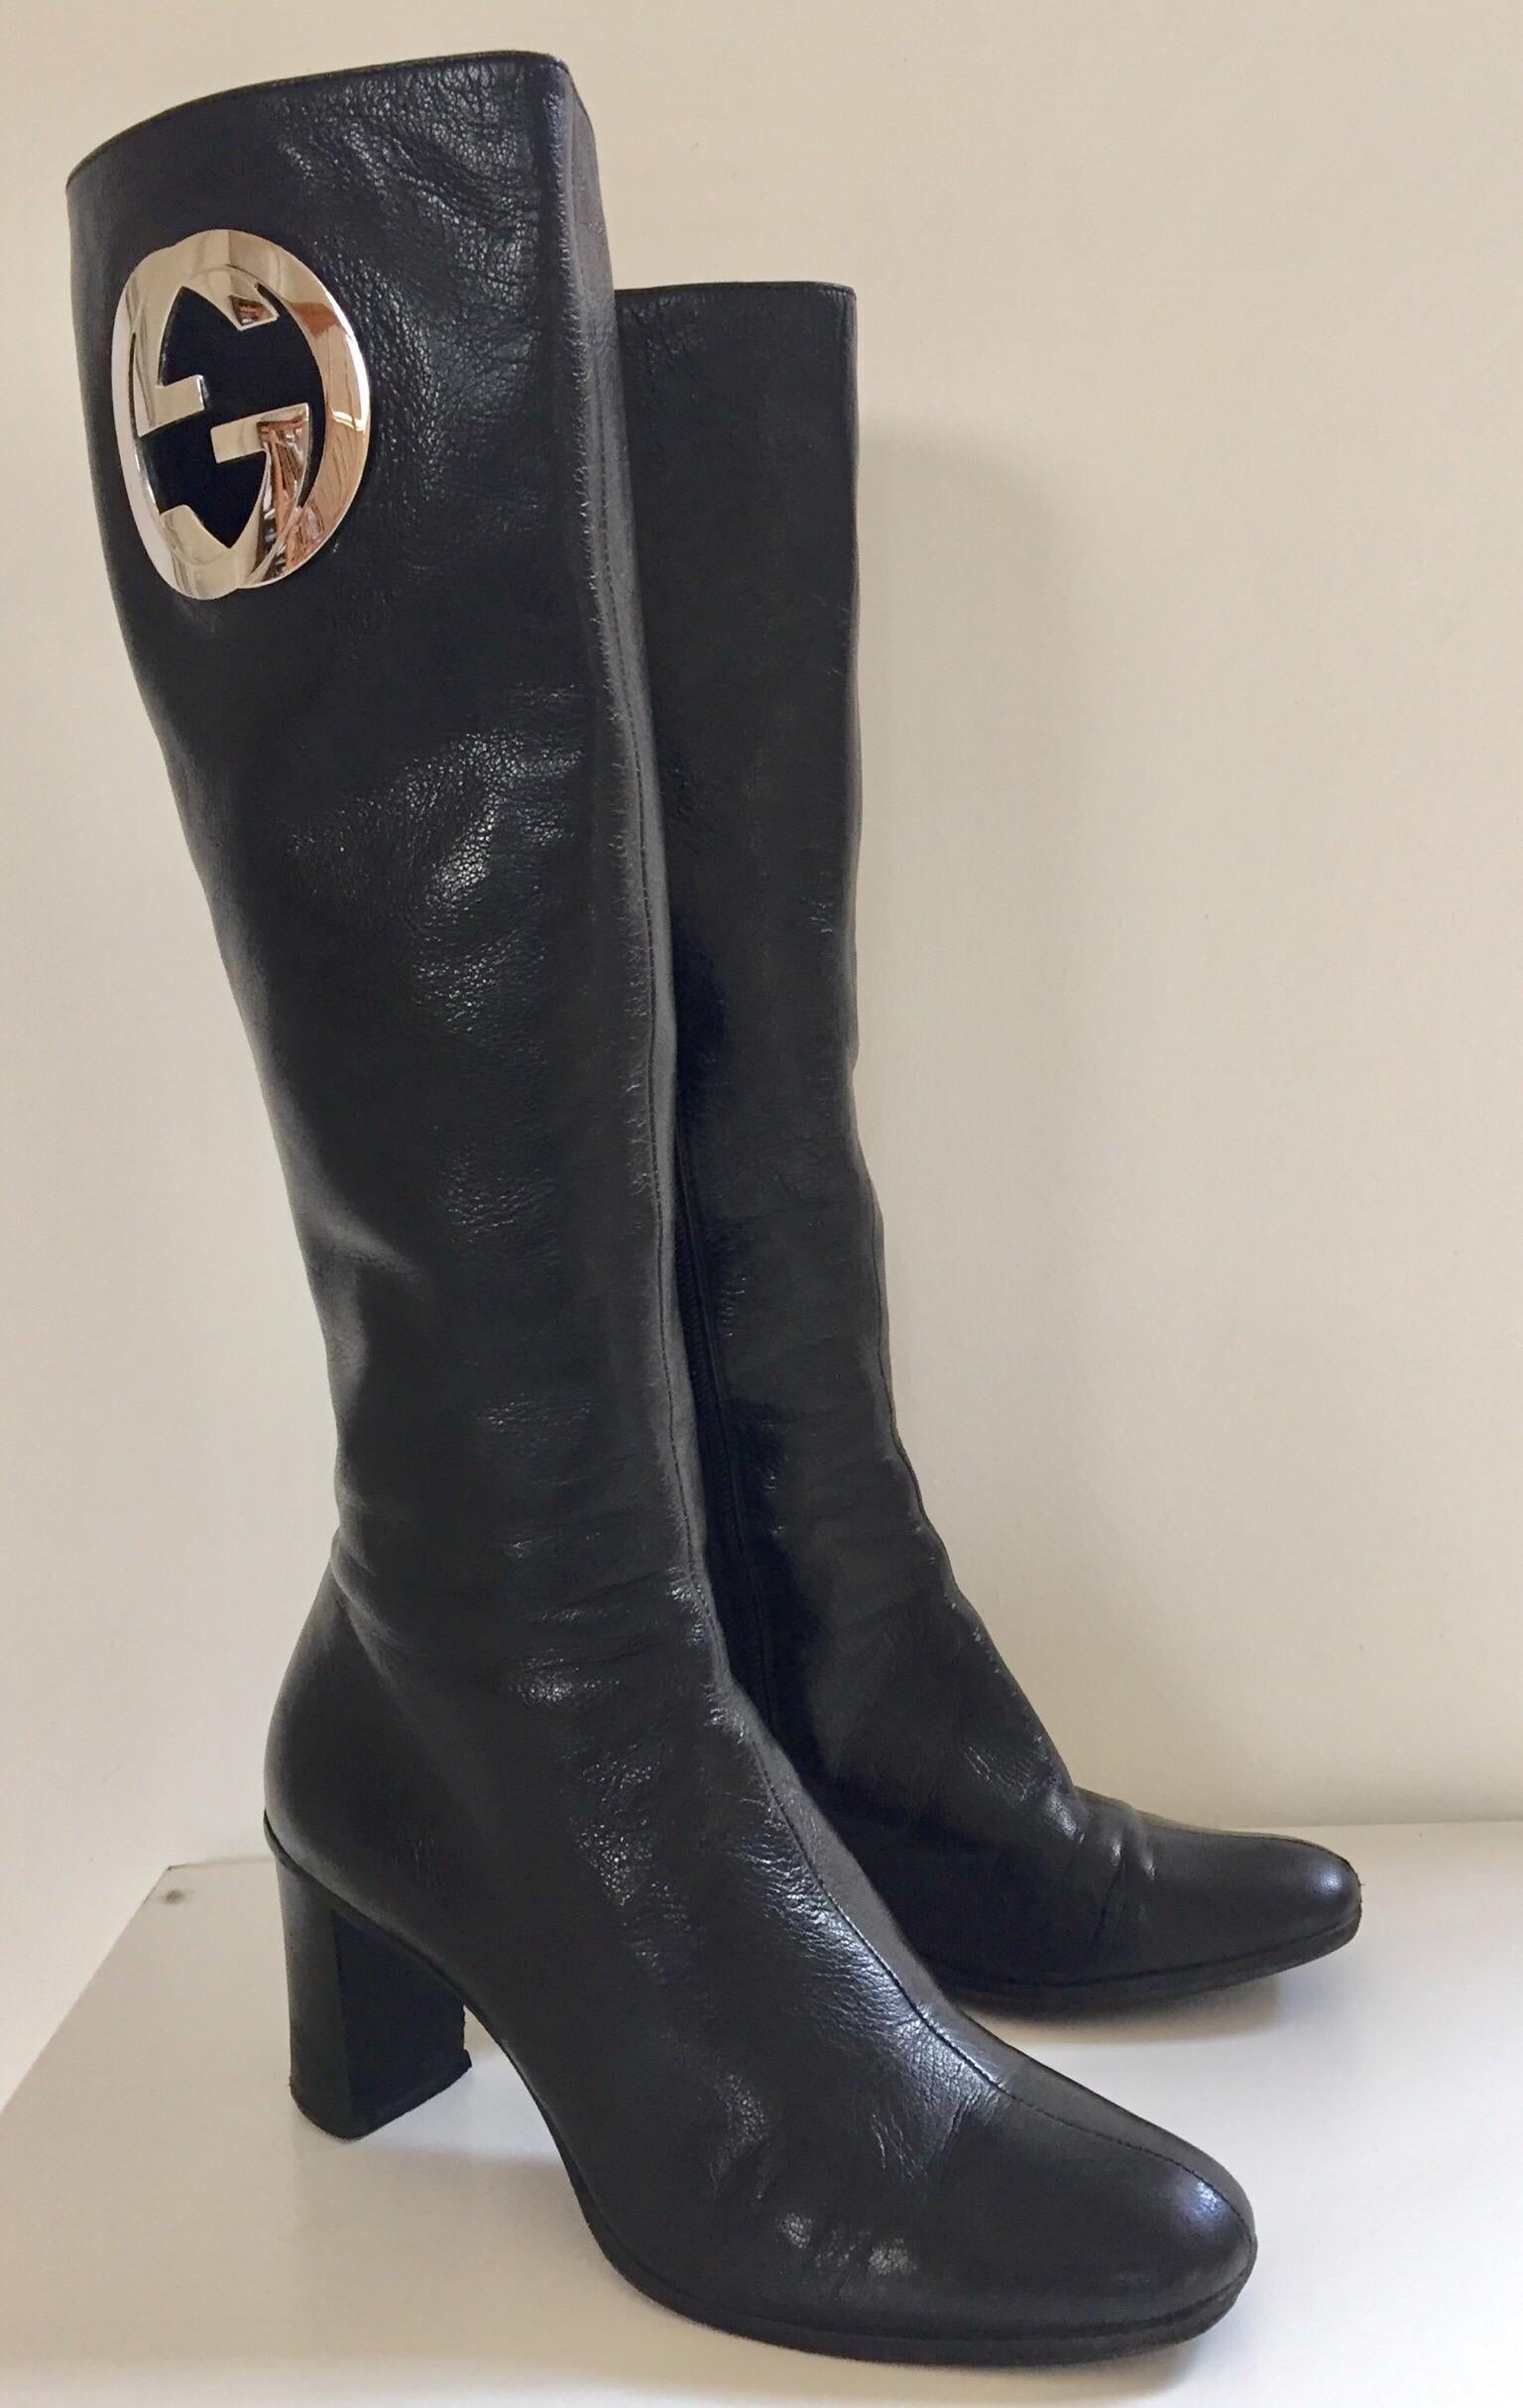 Tom Ford’s Gucci pair of knee-high leather boots, circa 1999.
In a sleek silhouette, these vintage Gucci boots are crafted in black lamb supple leather, finished with a block heel, side zipper and a prominent monogram in silver tones on only one